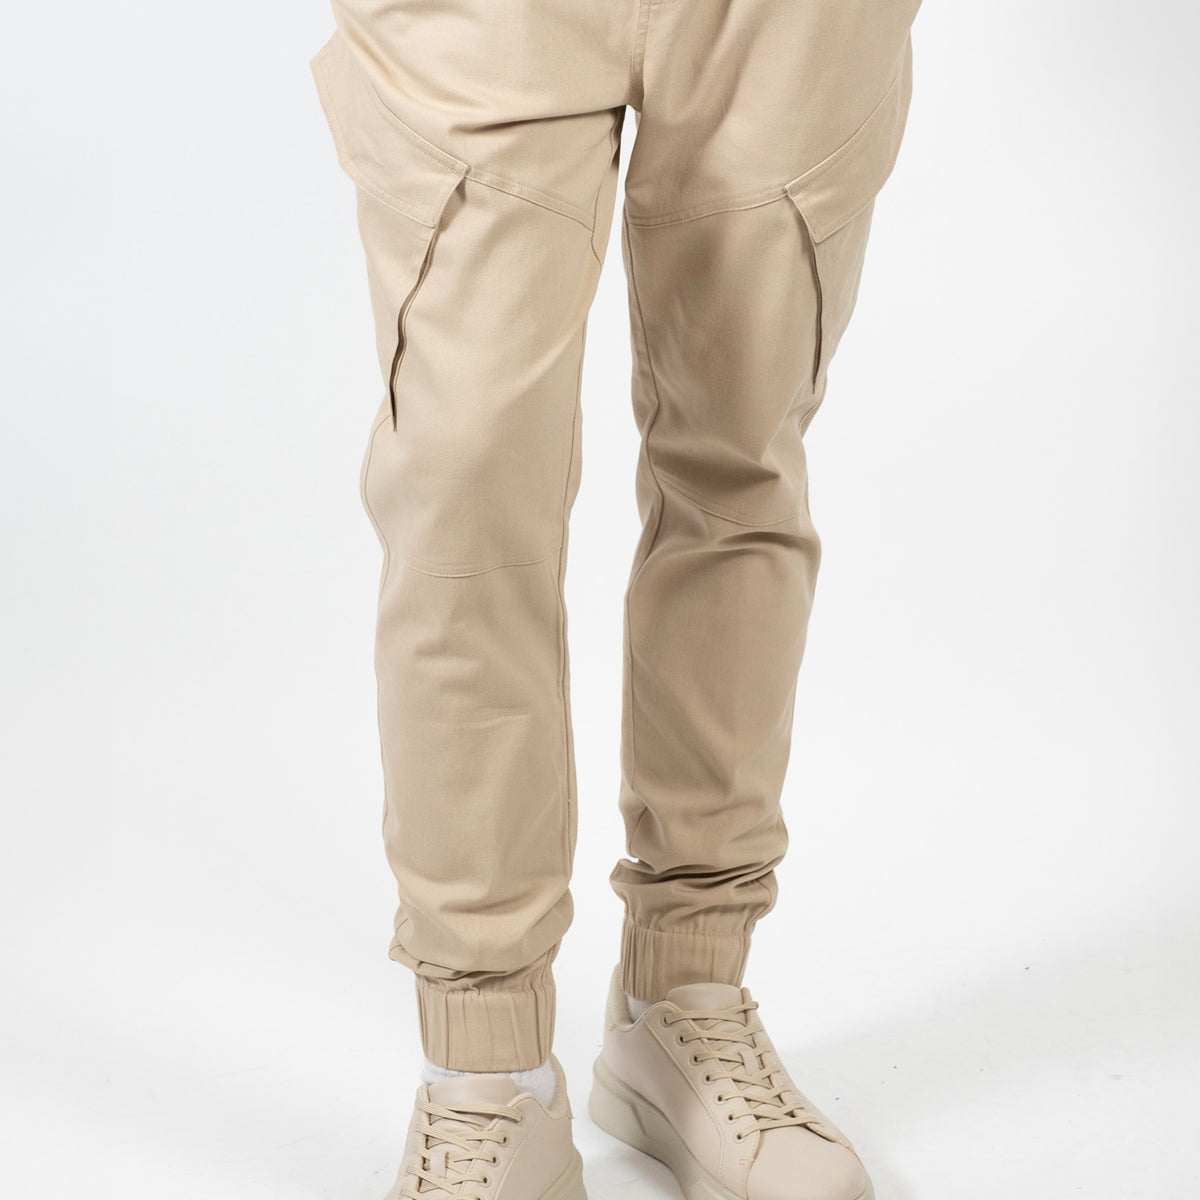 Men's Polyester-Spandex Twill Cargo-Design Track Pants / Joggers with  Multifunctional Curvy Zip Pouch Pockets. Suitable